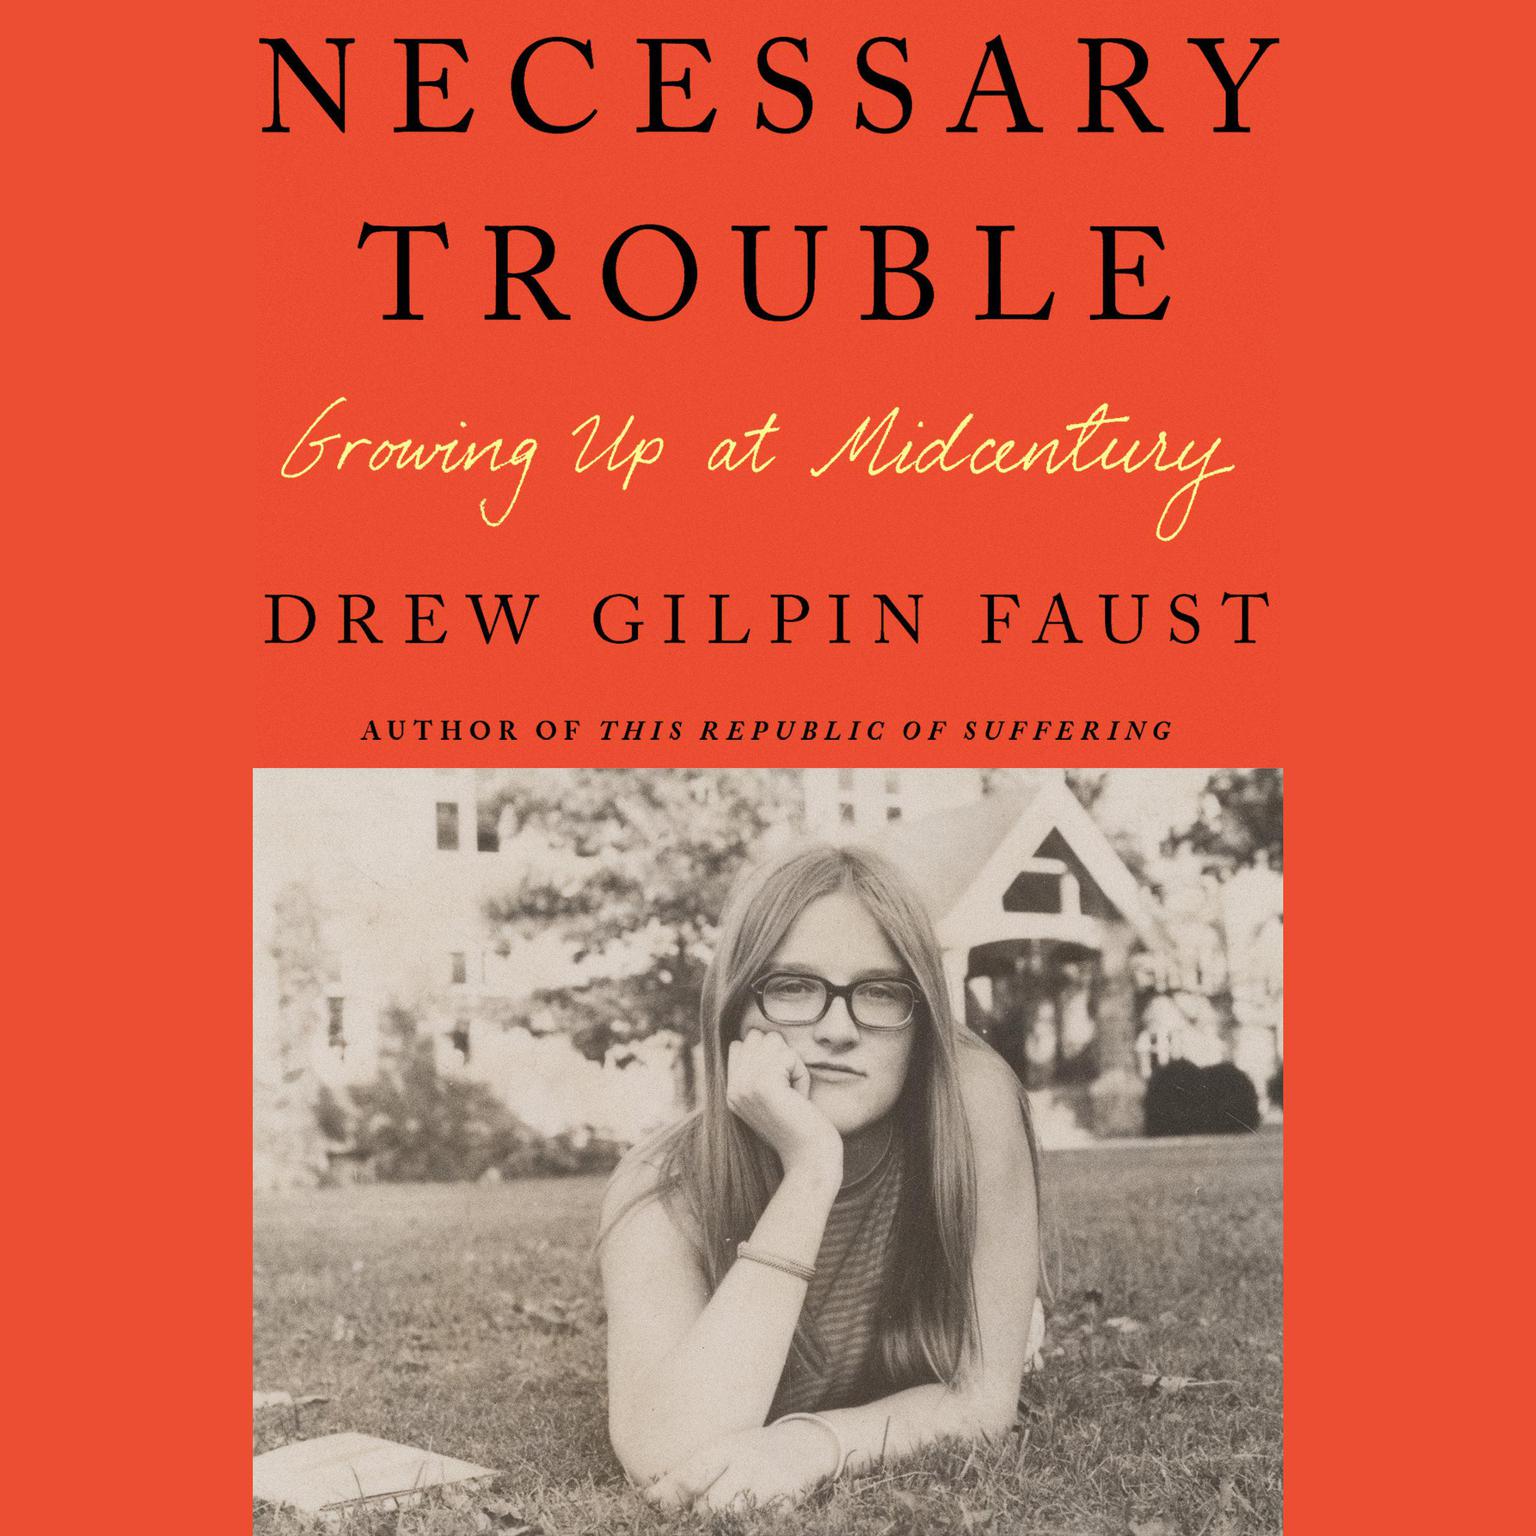 Necessary Trouble: Growing Up at Midcentury Audiobook, by Drew Galpin Faust